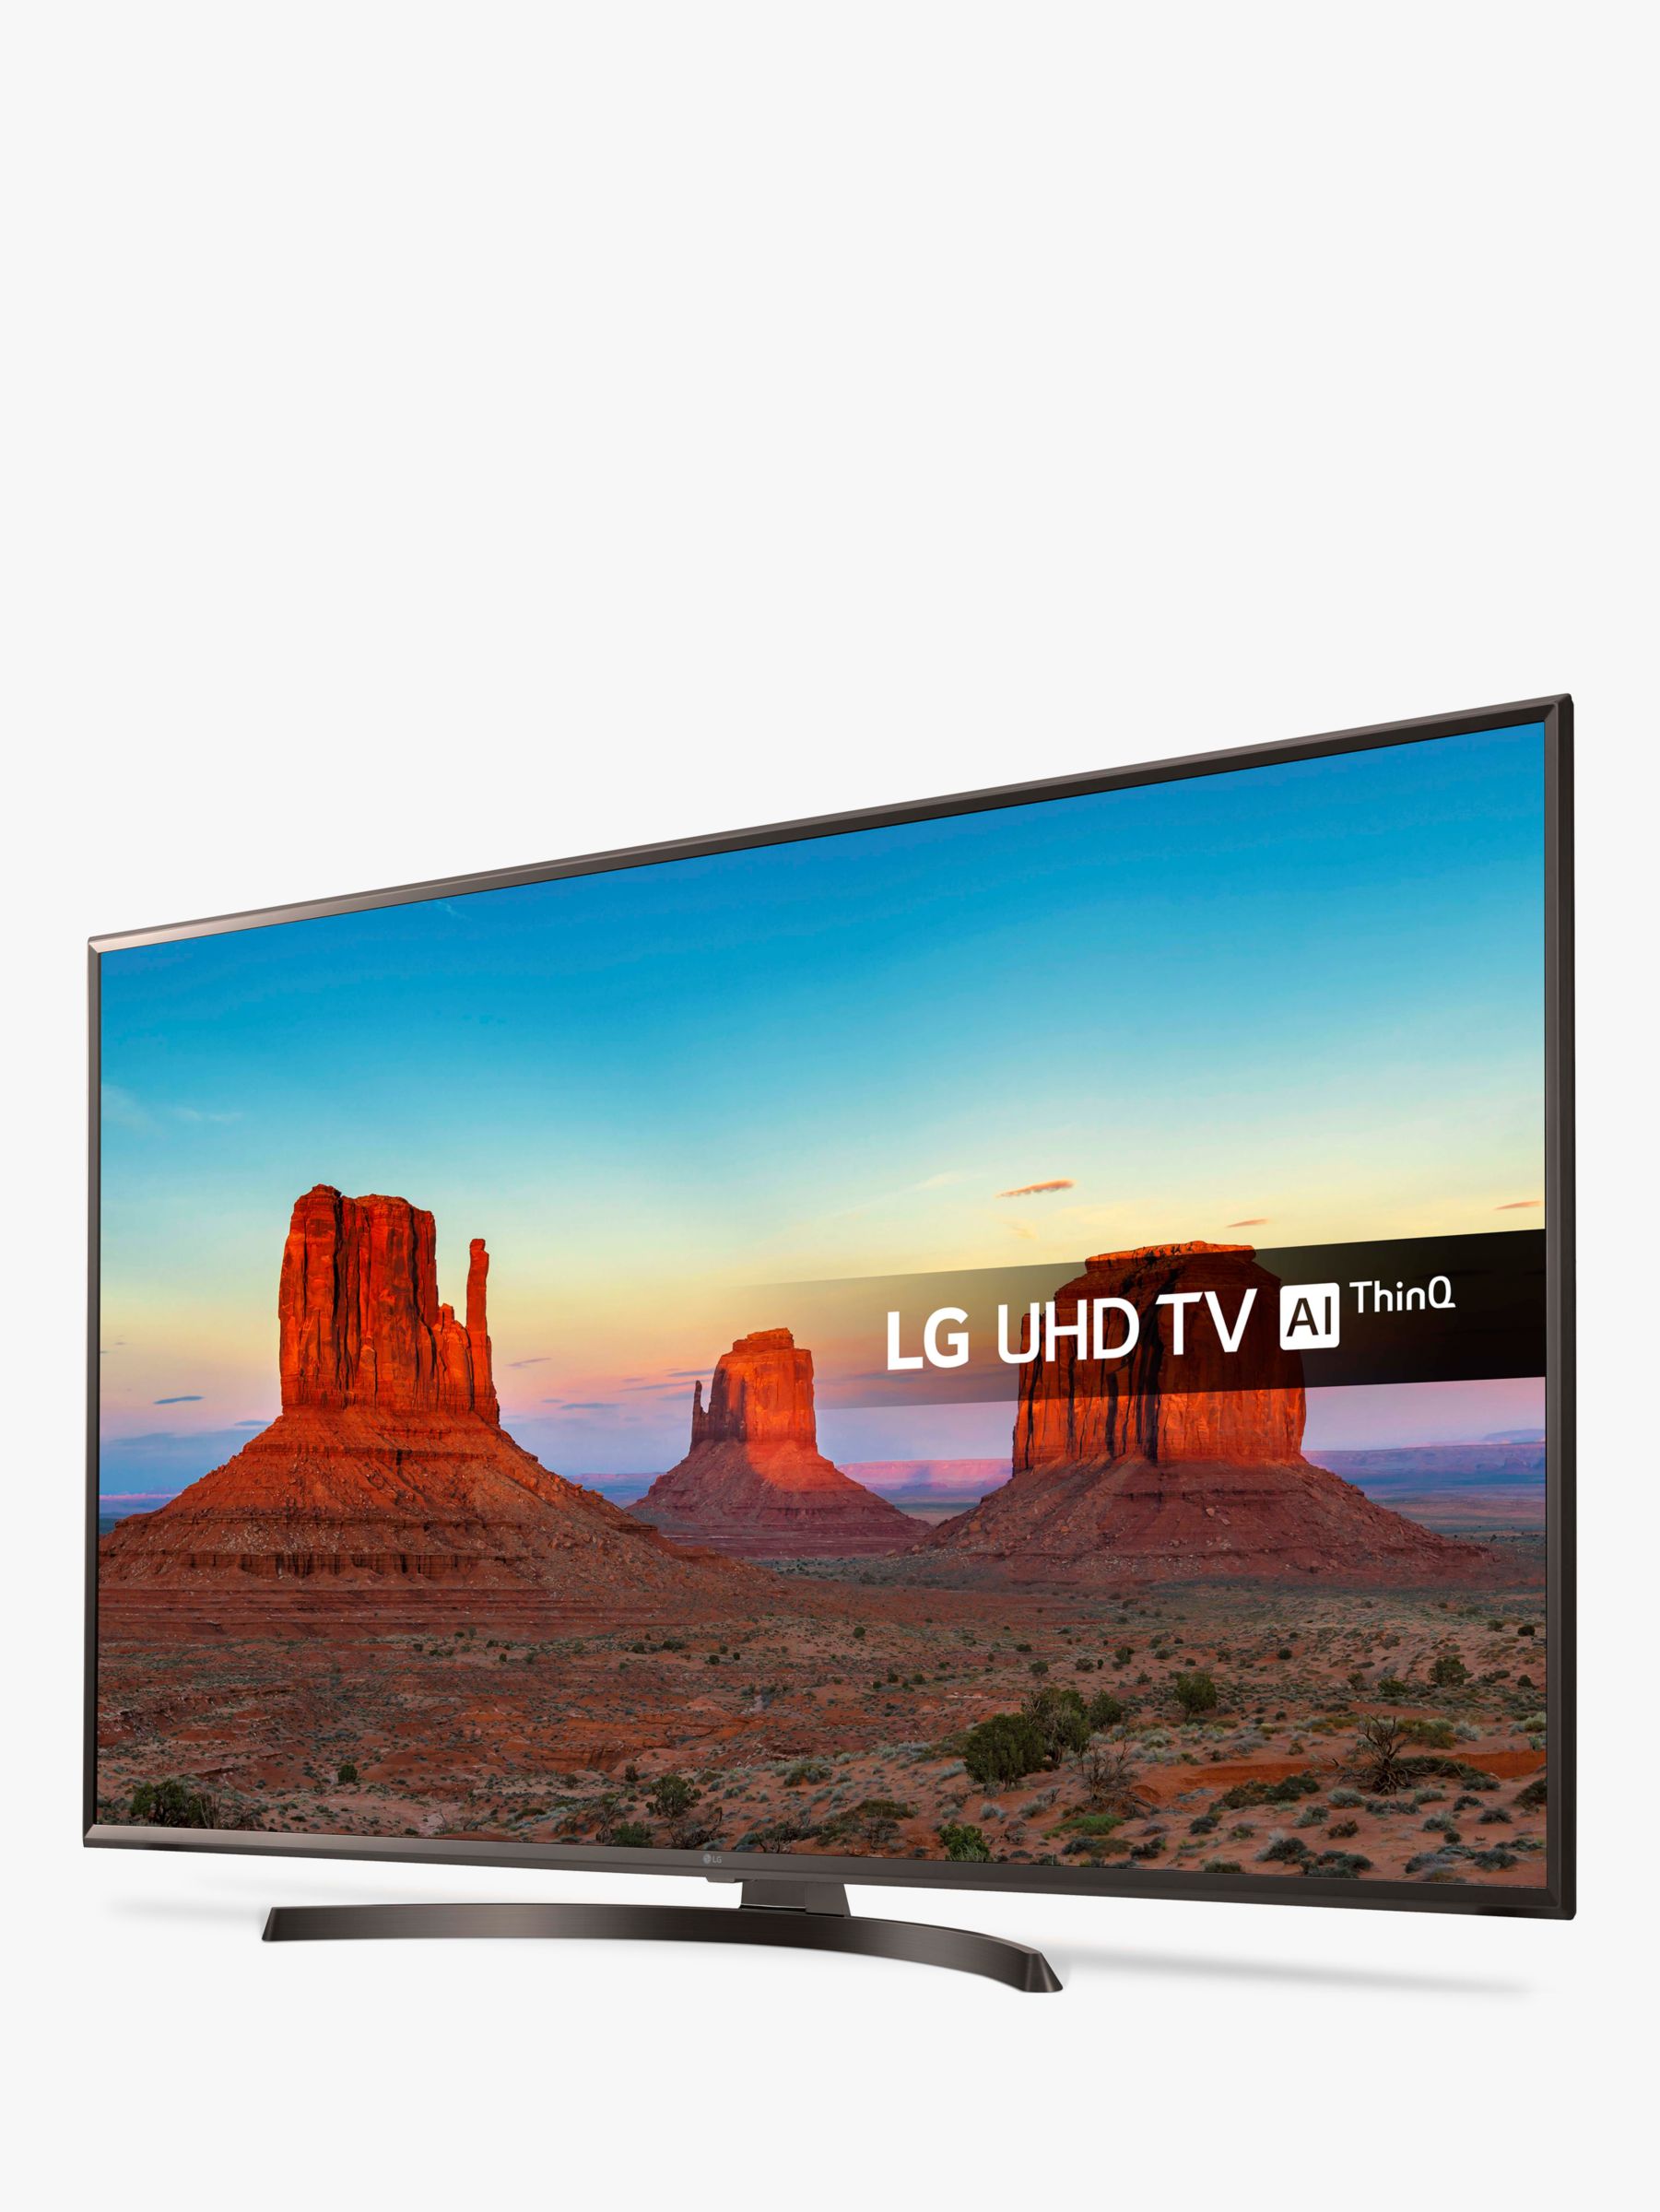 LG 55UK6400PLF LED HDR 4K Ultra HD Smart TV, 55 with Freeview Play/Freesat HD & Crescent Stand, Ultra HD Certified, Metallic Bronze